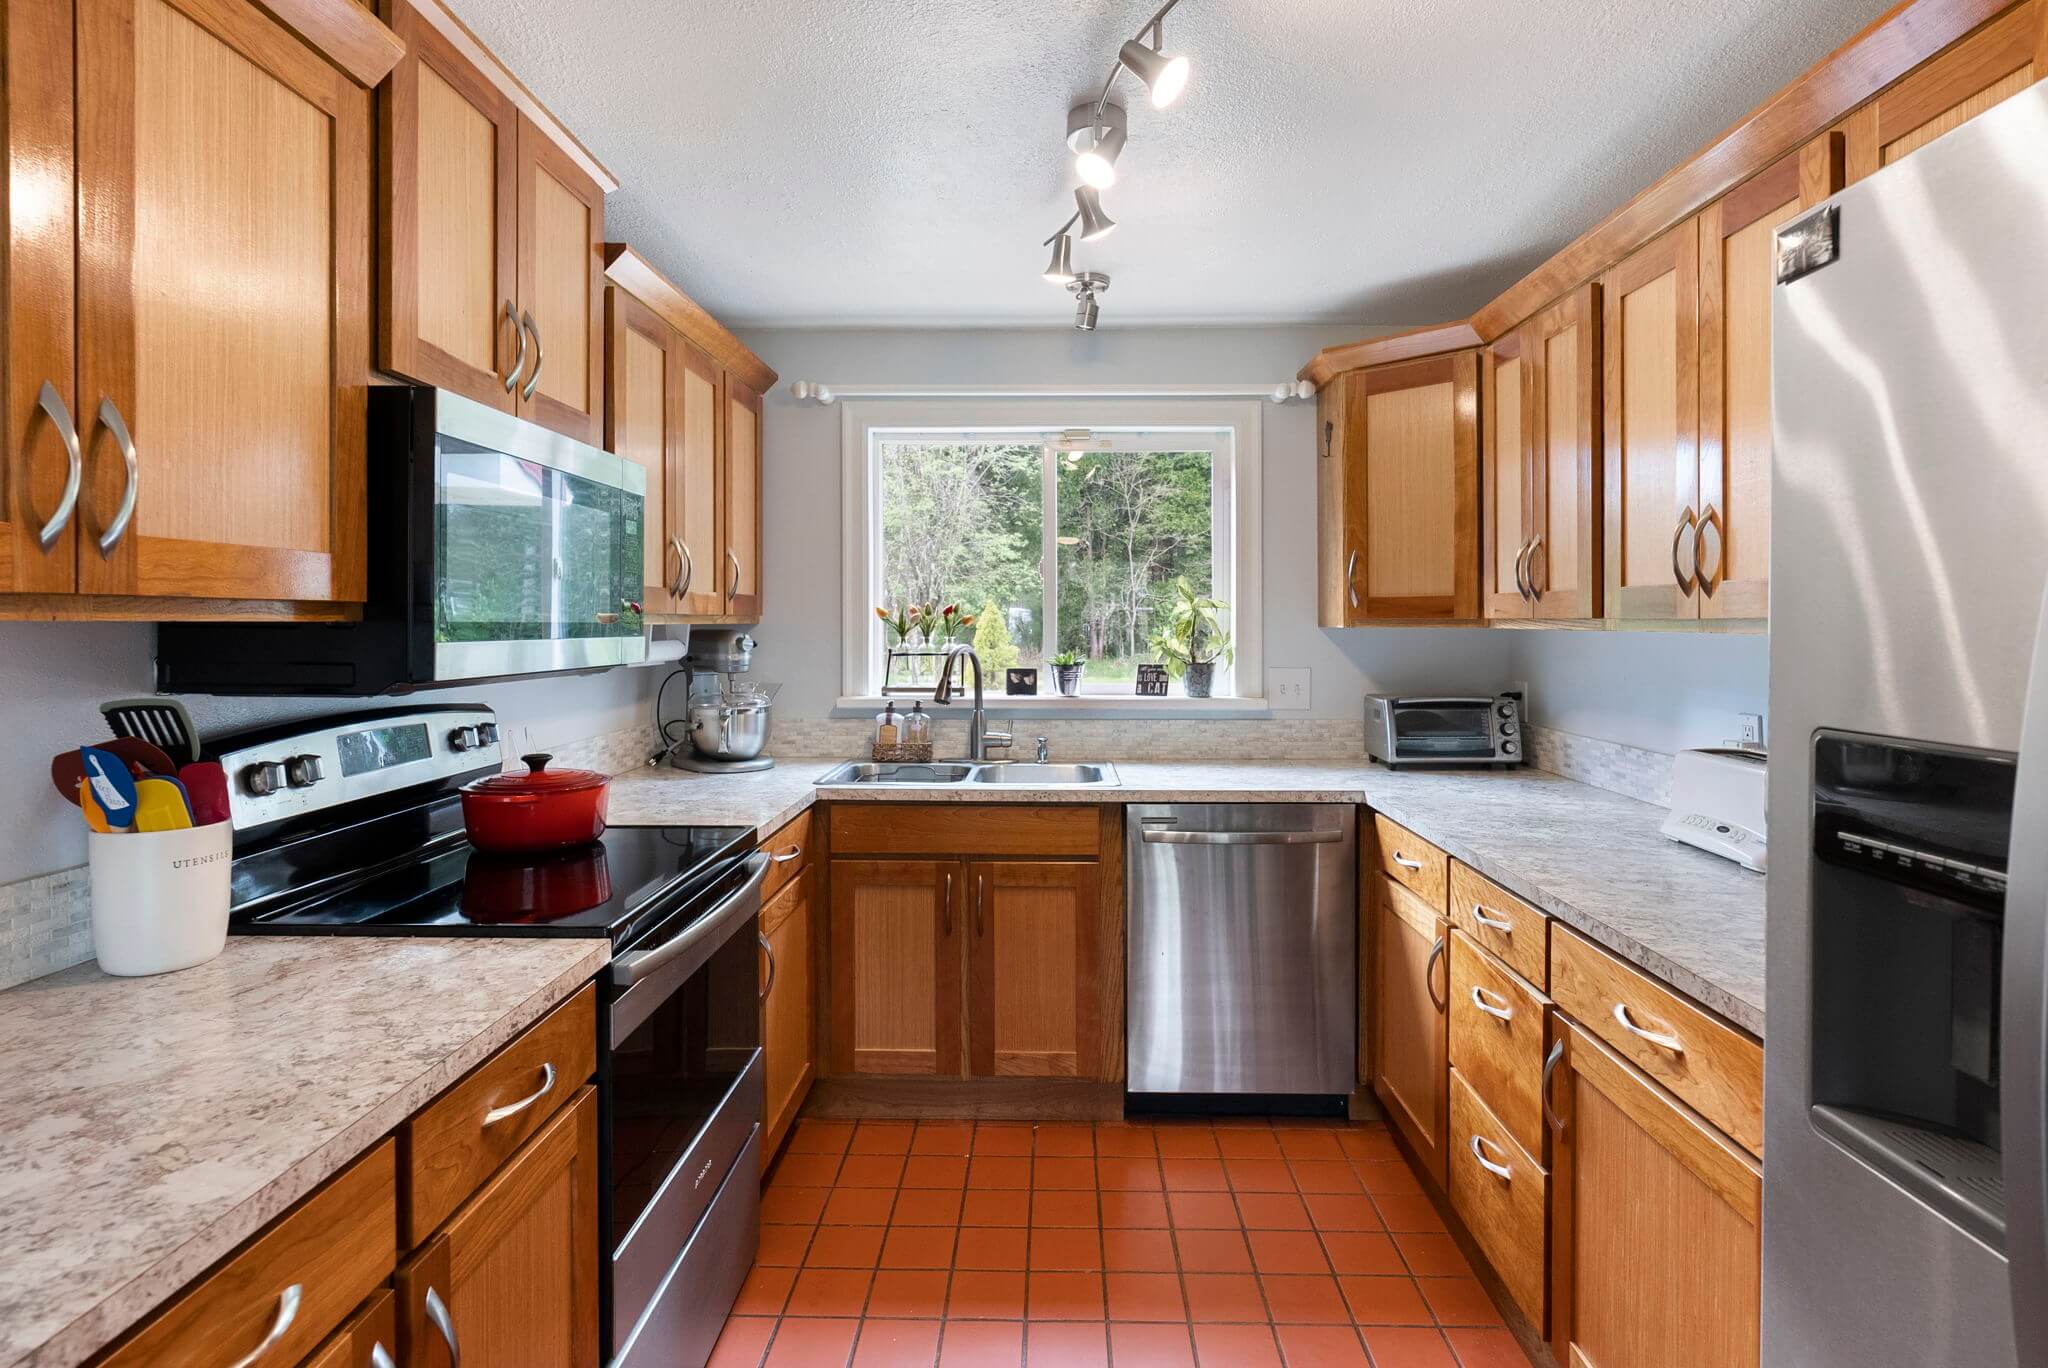 Updated kitchen with cherry cabinets and stainless appliances